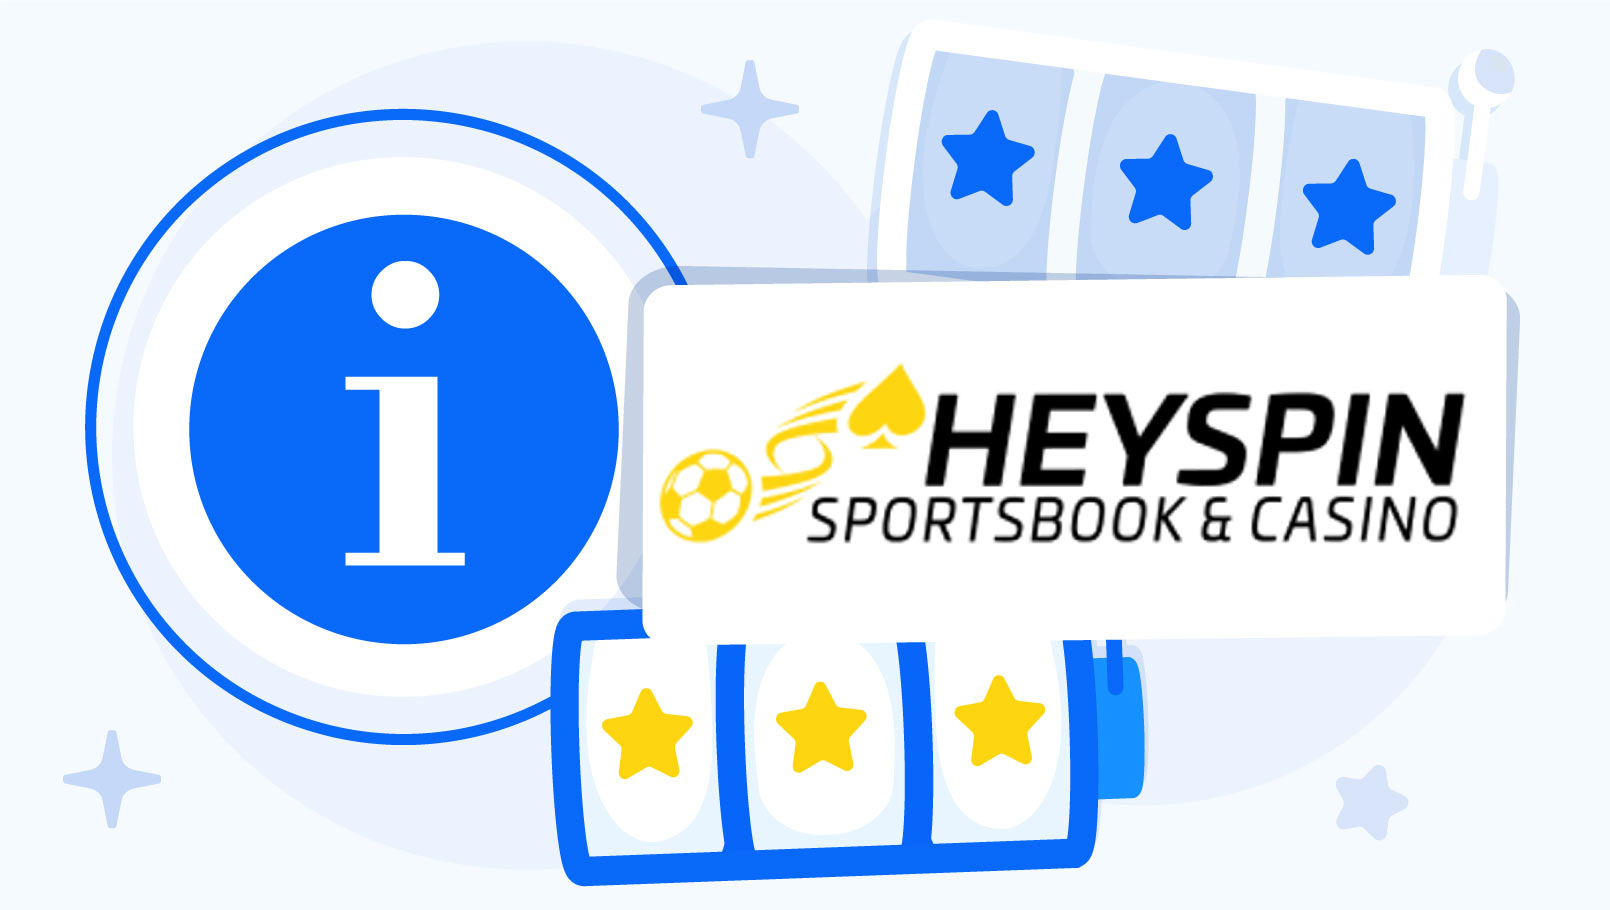 Who Are the HeySpin Casino Sister Sites